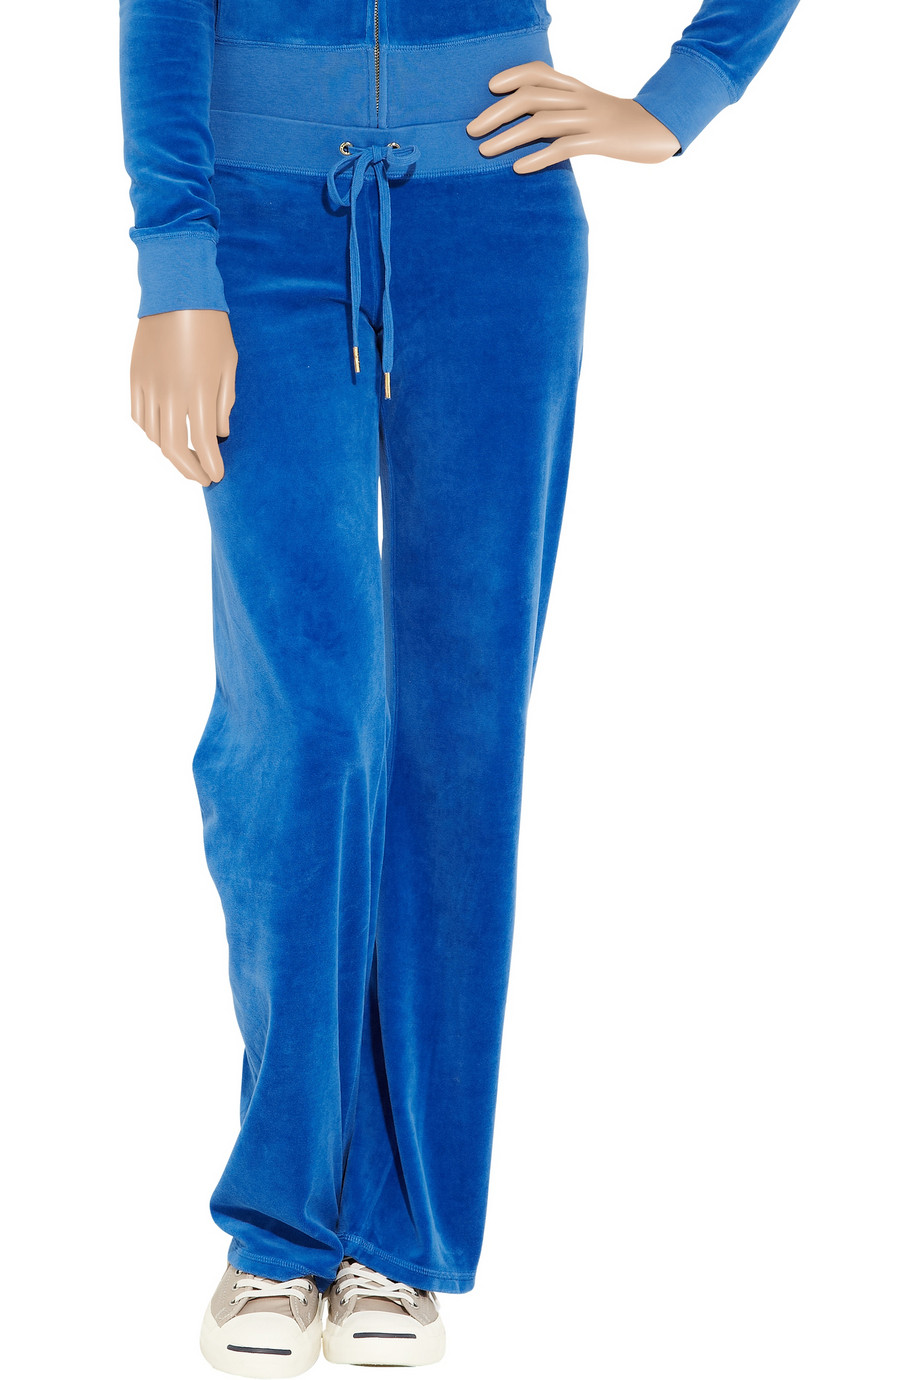 Lyst - Juicy couture Embellished Velour Track Pants in Blue